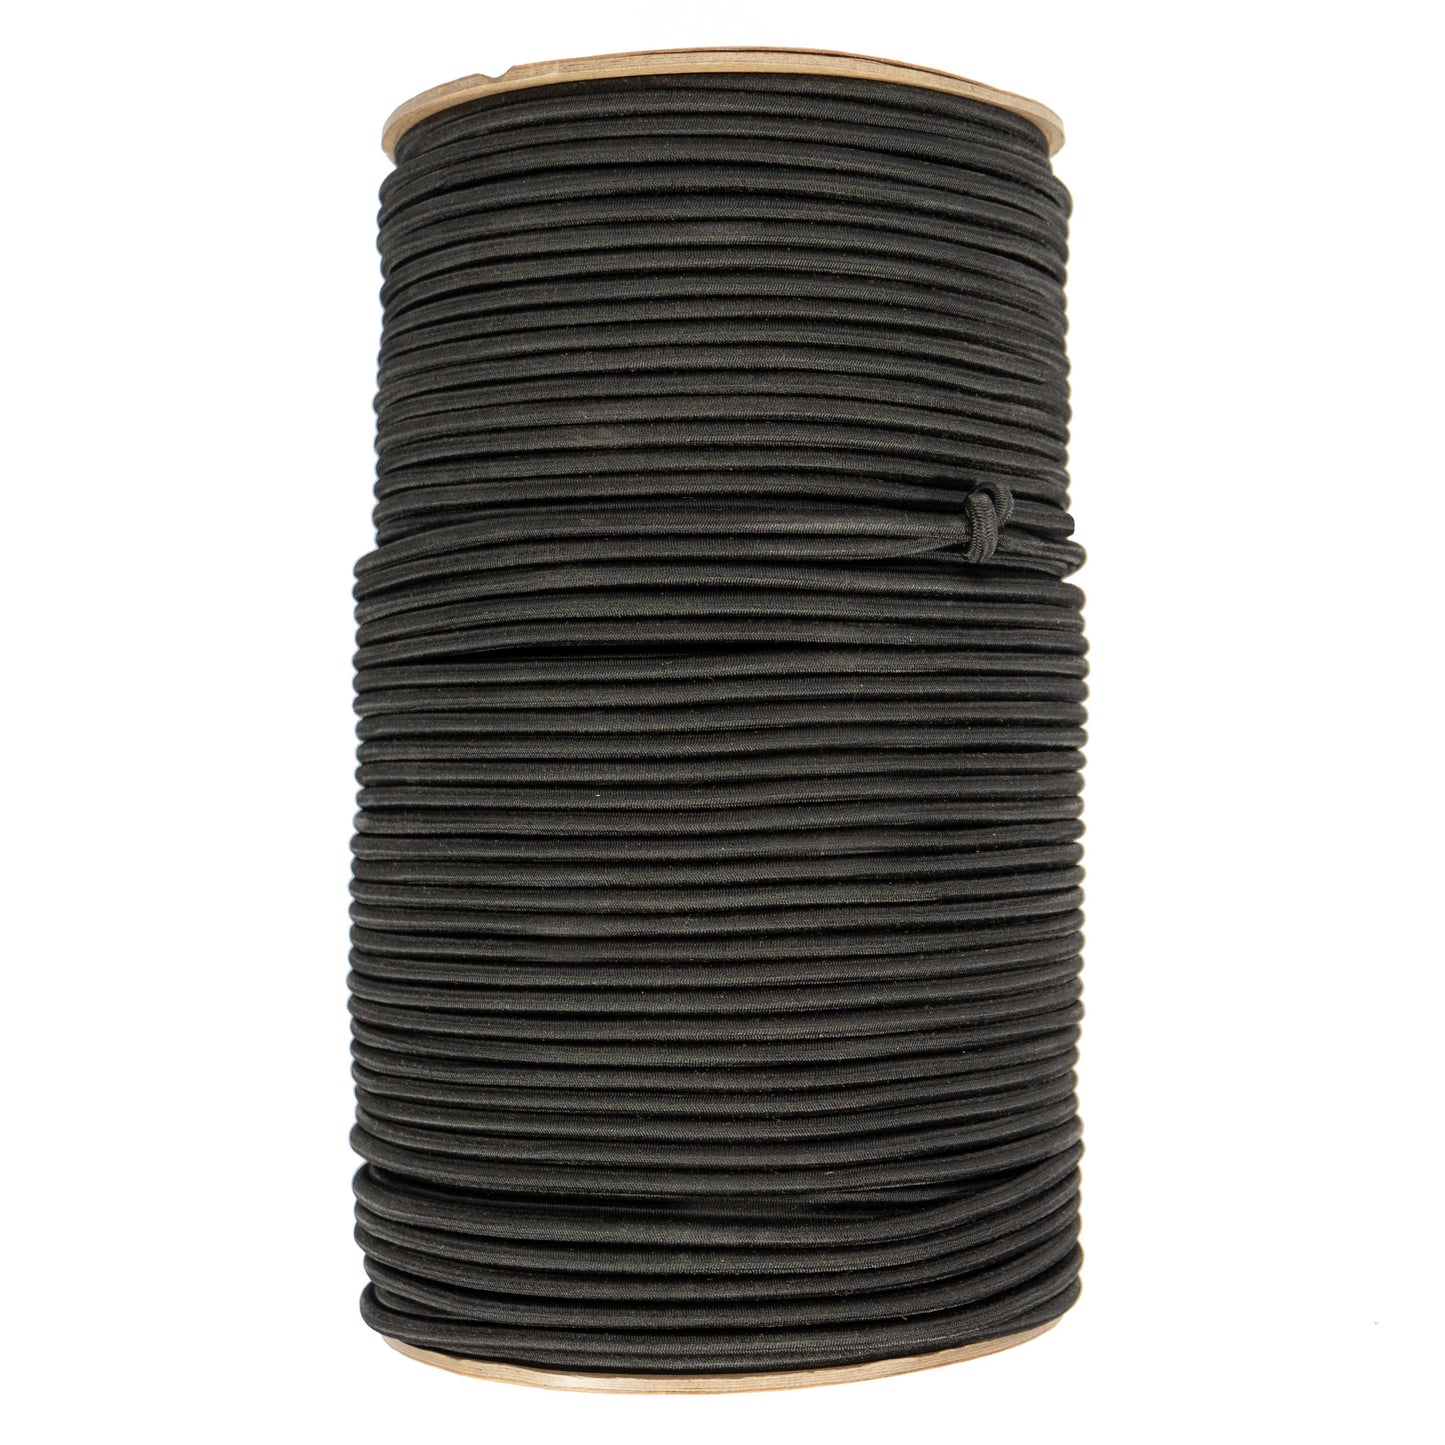 316 foot foot5mm Black Polyester Shock Cord Spool (500 foot) image 1 of 7